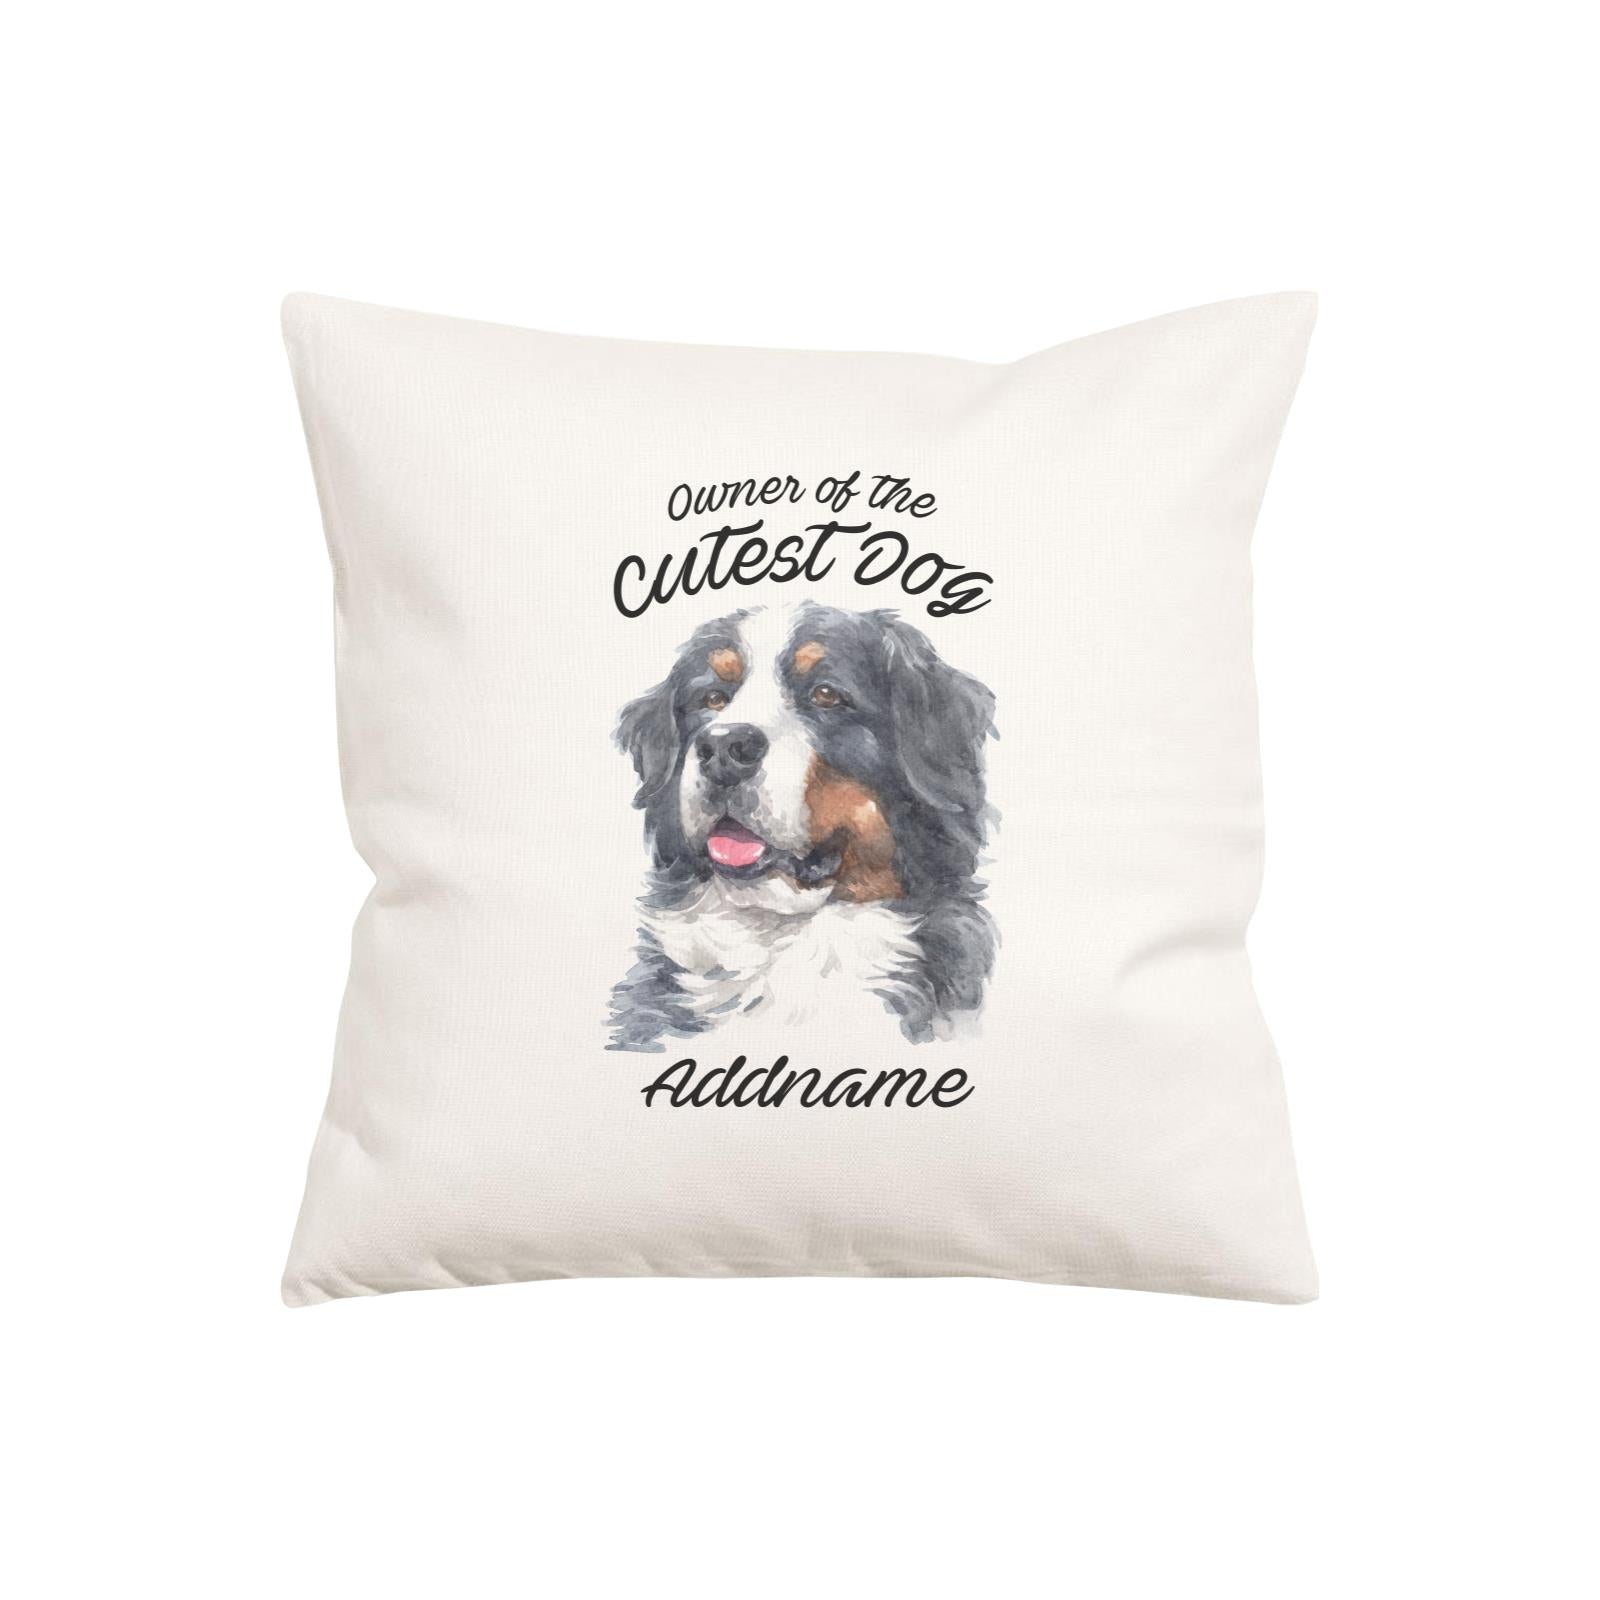 Watercolor Dog Owner Of The Cutest Dog Bernese Mountain Dog Addname Pillow Cushion